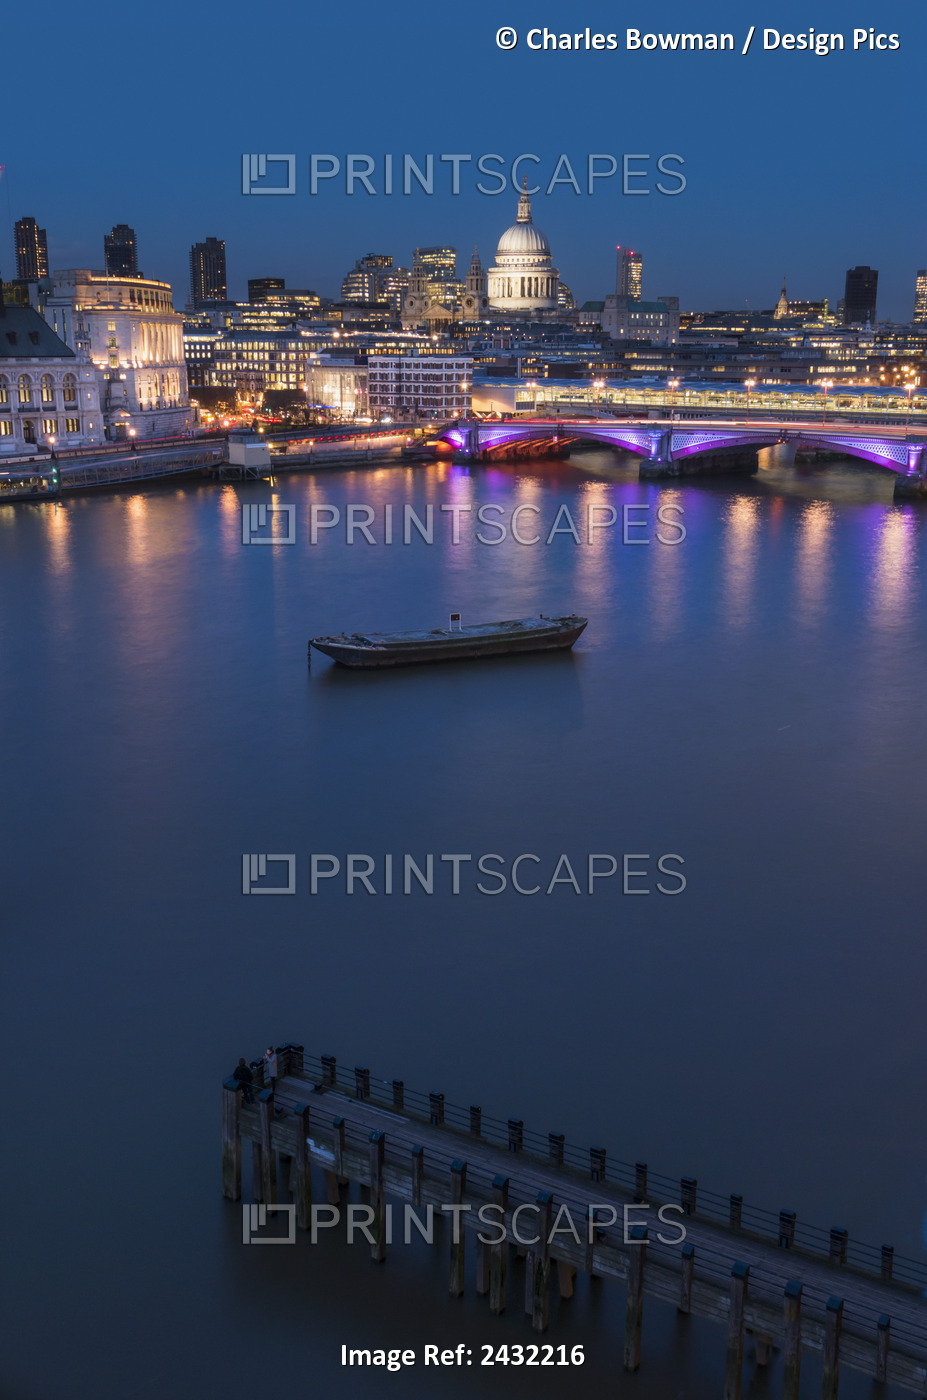 St. Paul's Cathedral And Blackfriars; London, England